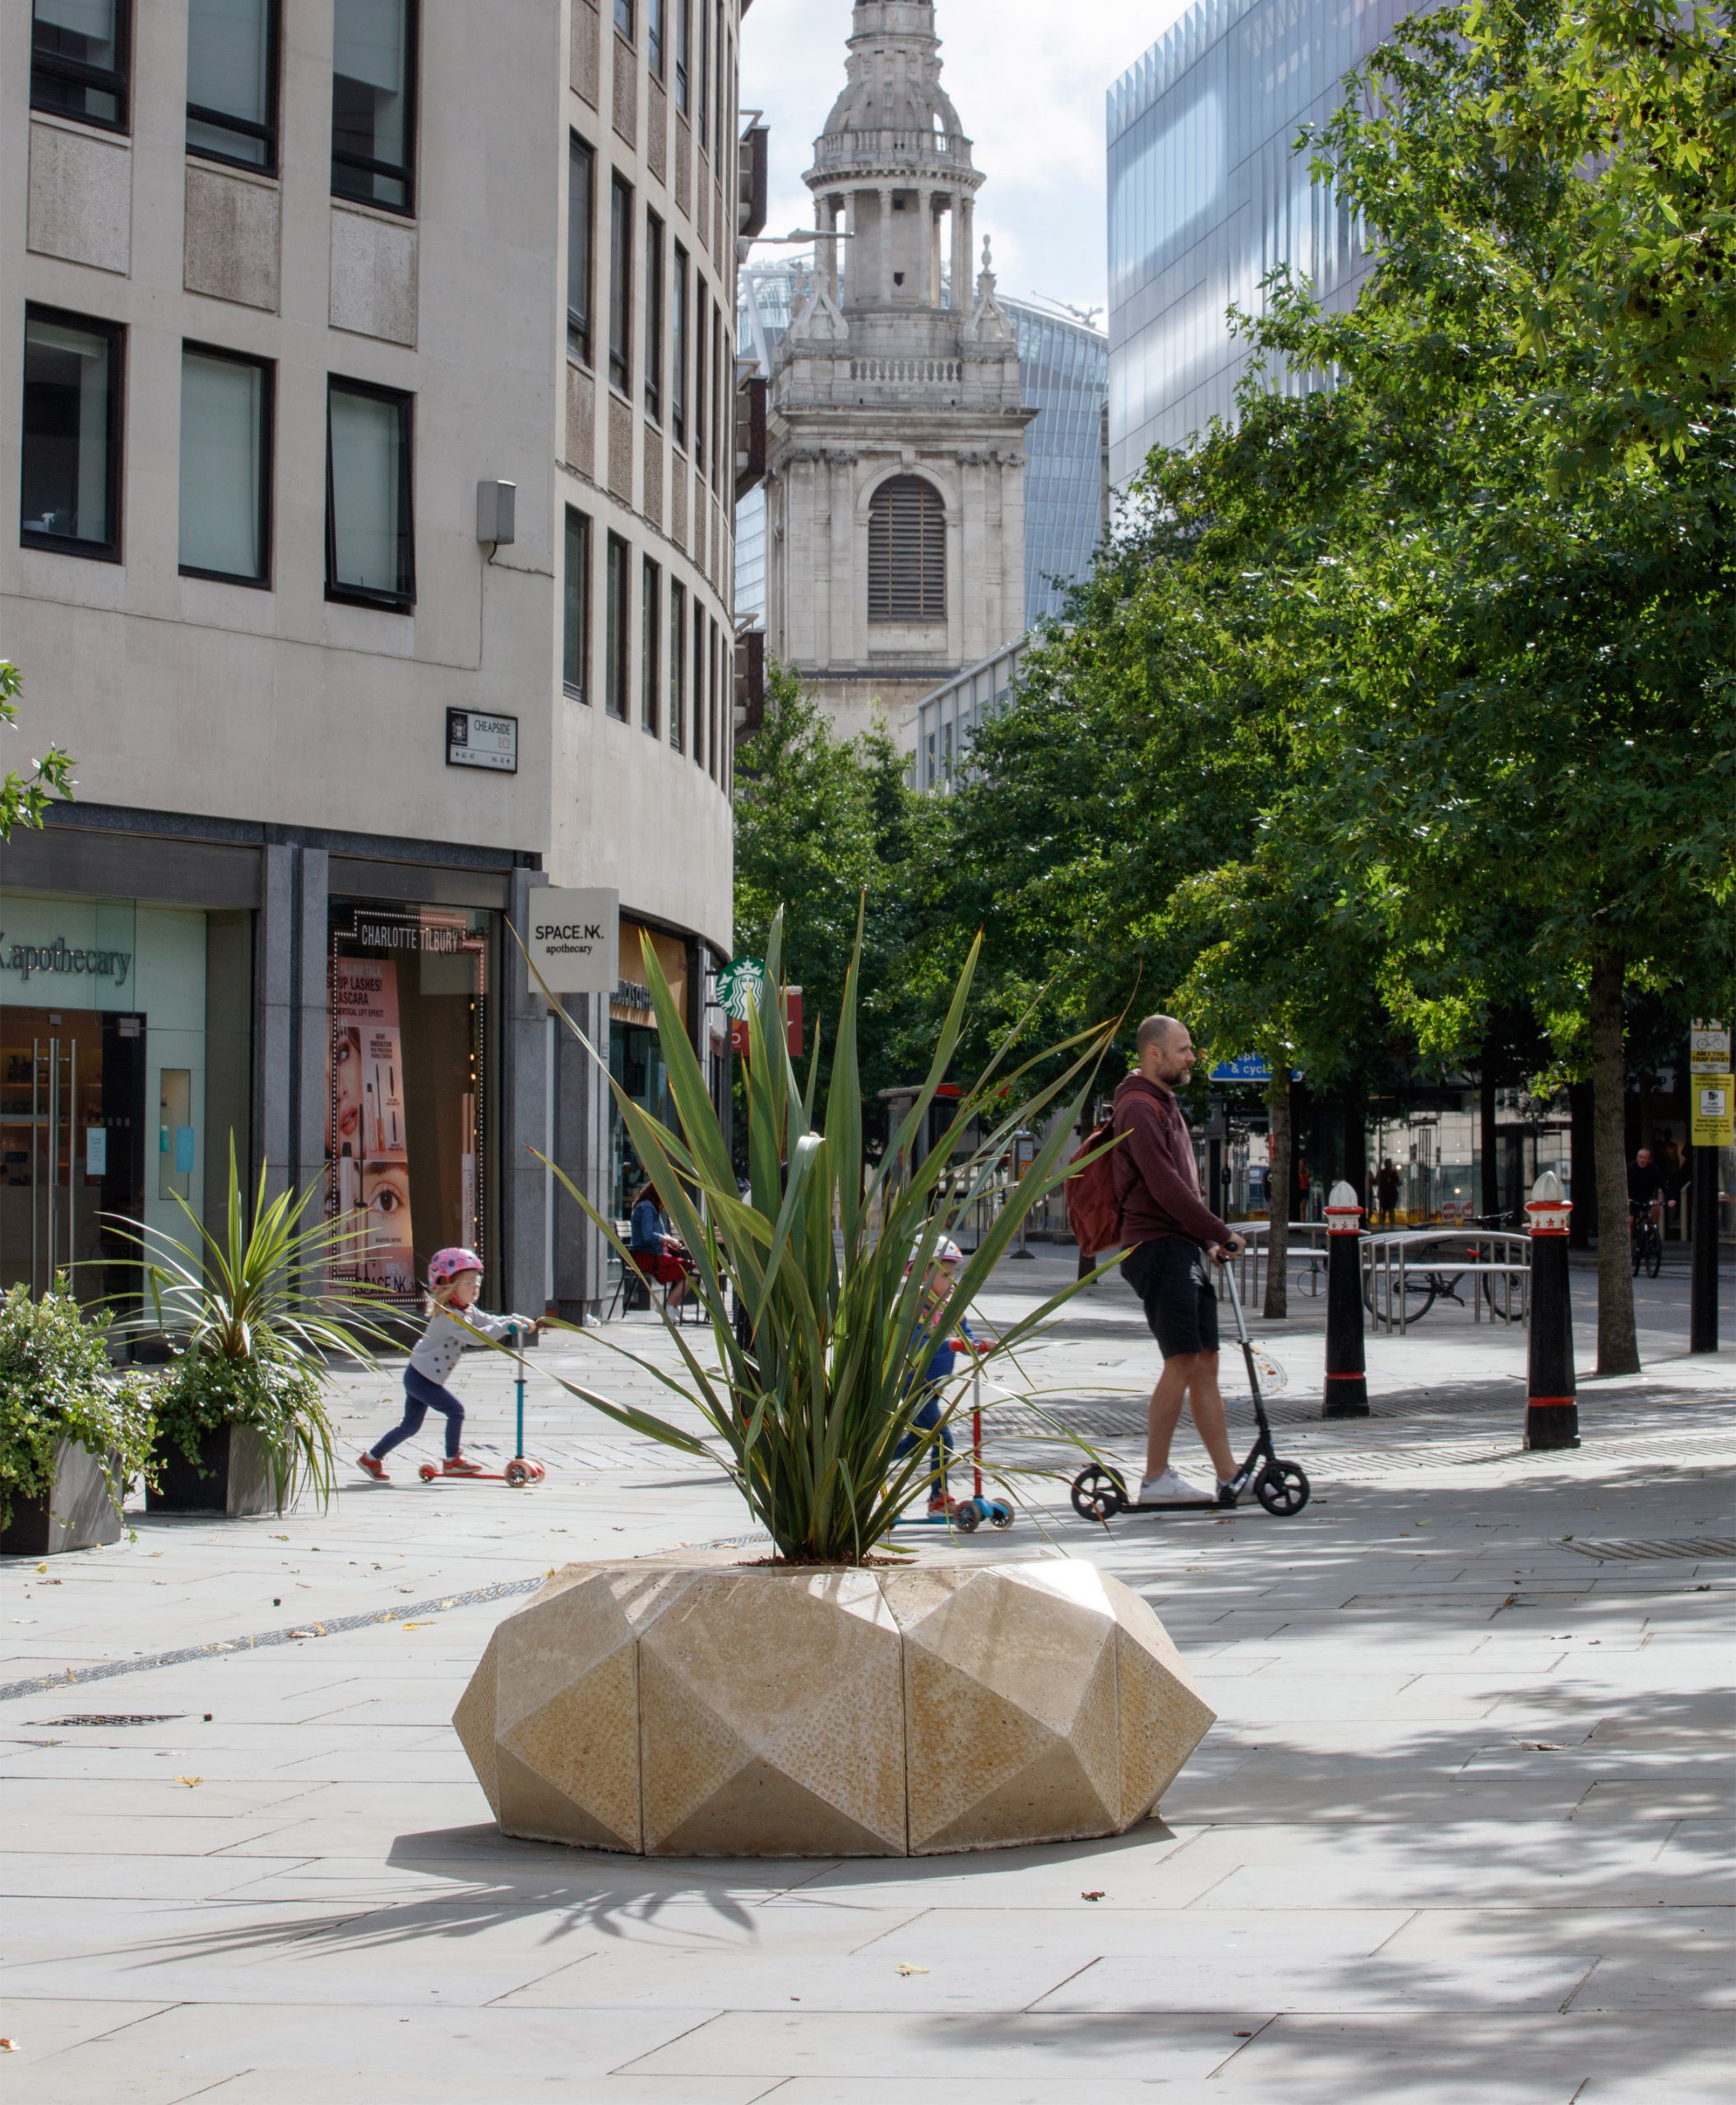 A Pineapple for London bench by Hugh Diamond, Archie Cantwell and Cameron Clarke